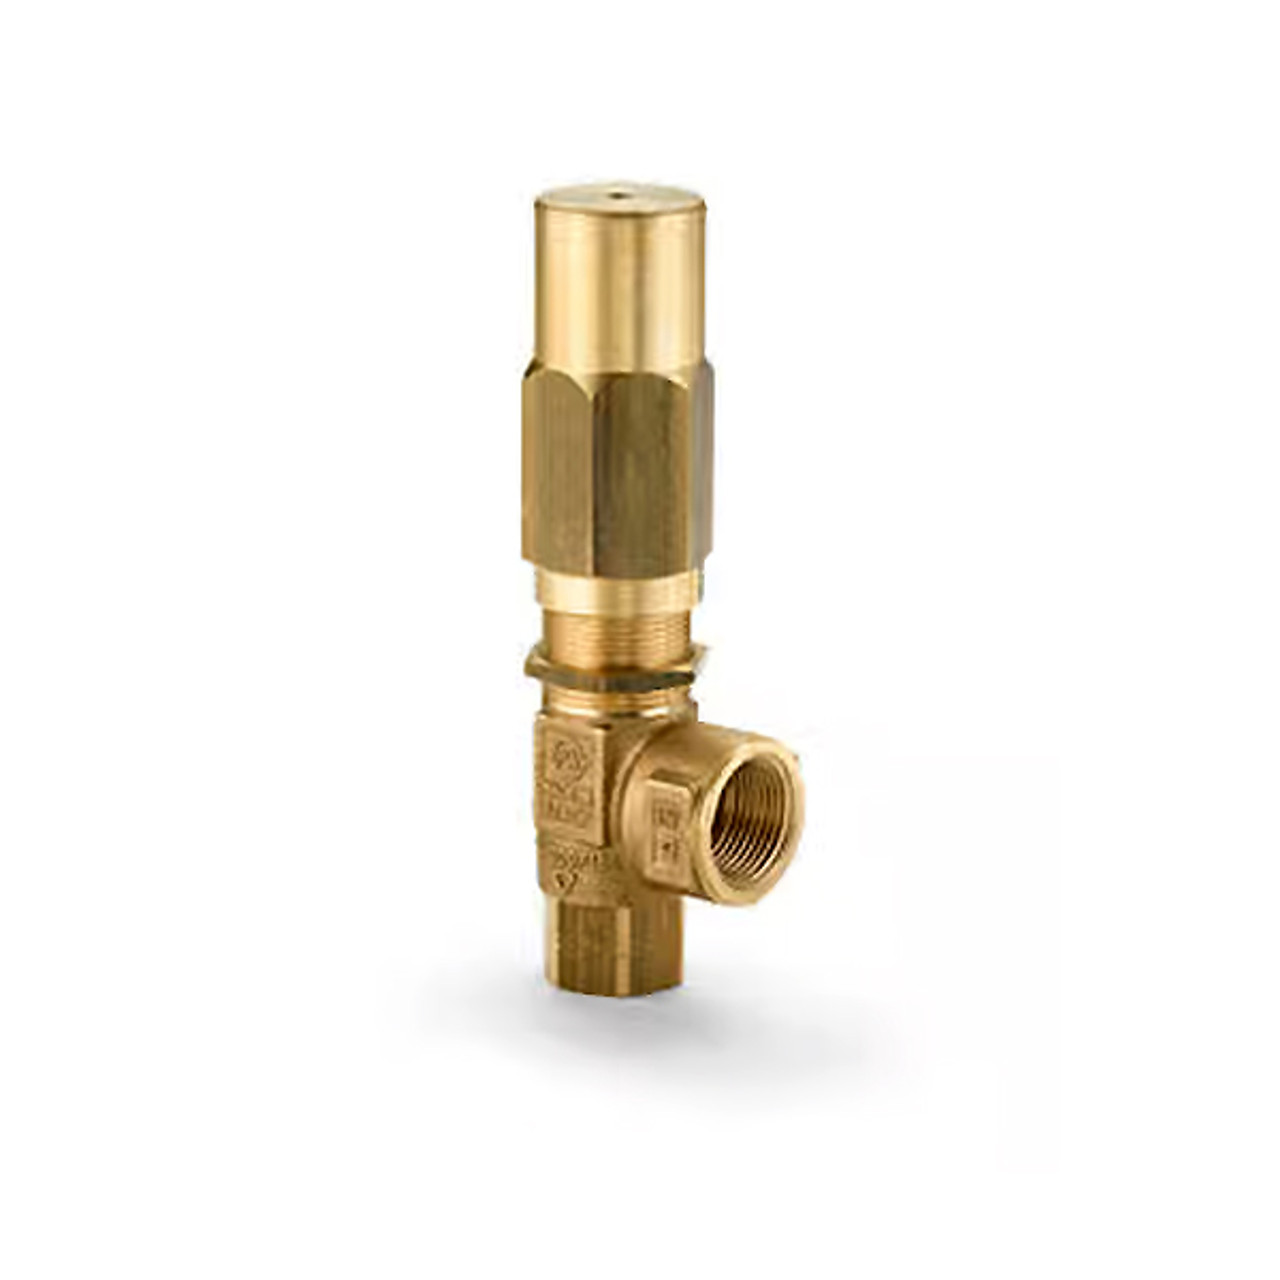 PA - High-Flow Pressure Relief Valve 3/4" Male 260-2600 PSI